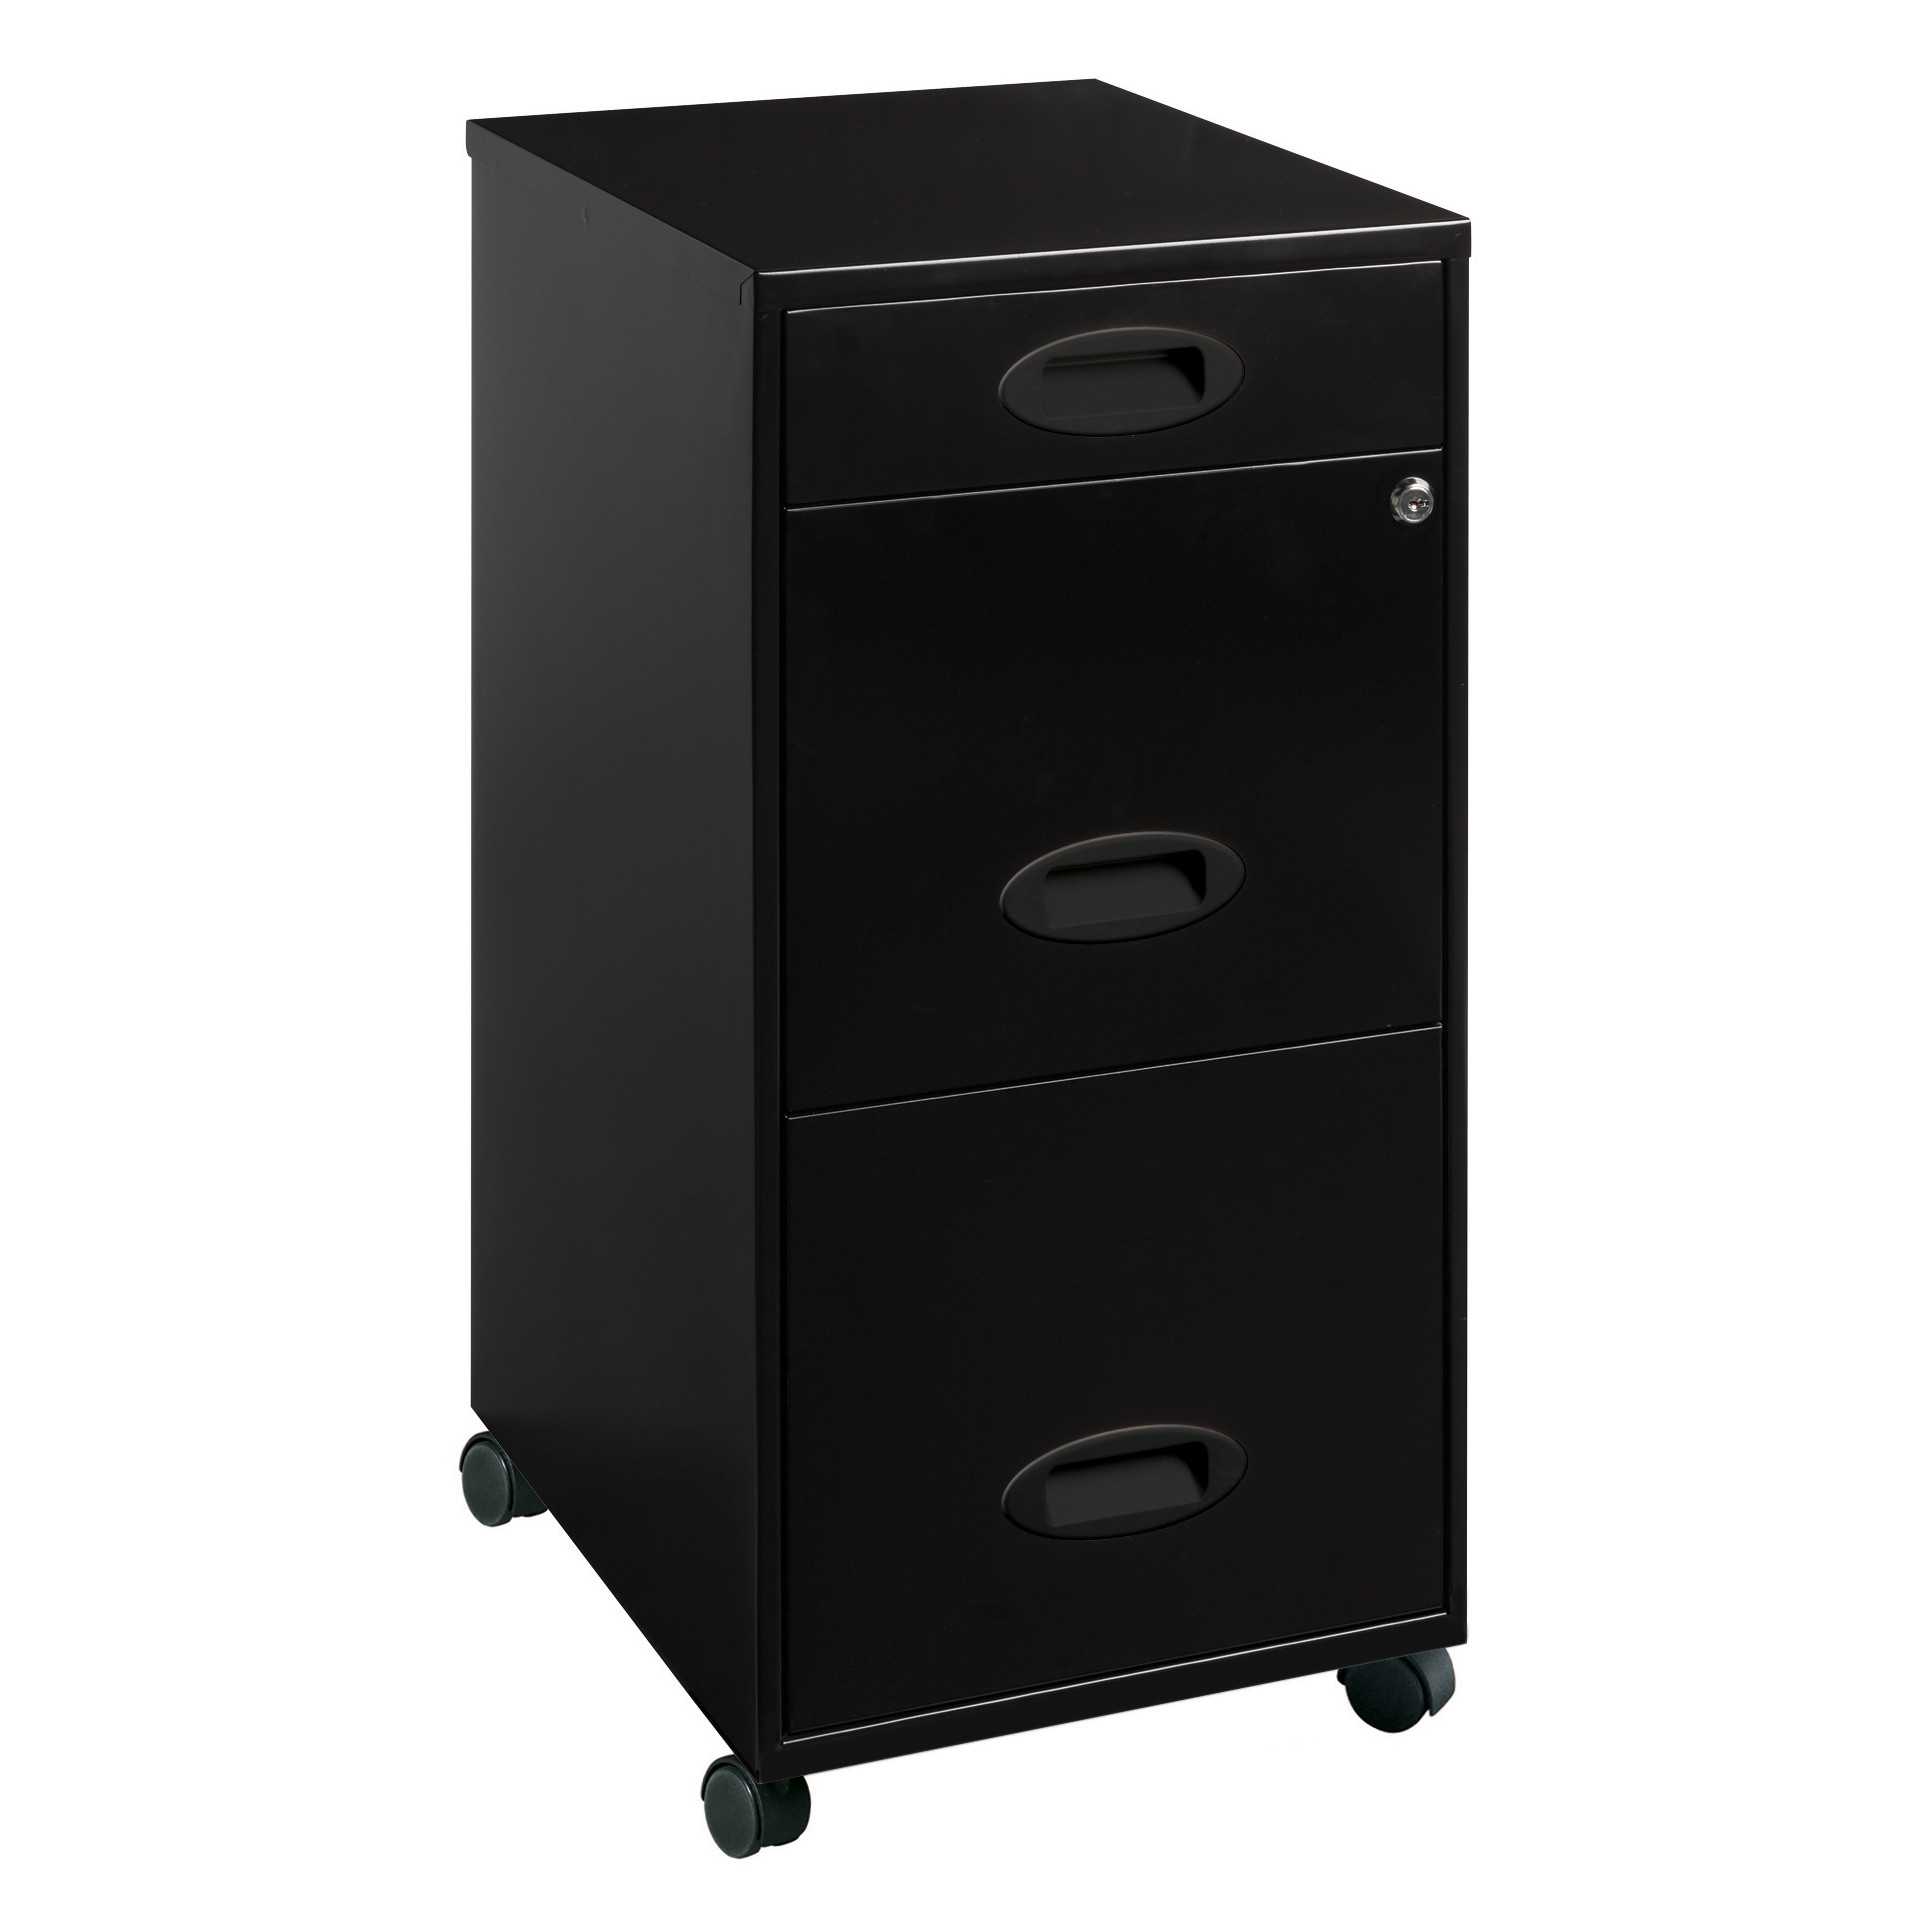 3 Drawer Storage Easy-roll casters and Round Corner for Safety Black Perfect for Office File Storage and SOHO Home Working Furniture. Mobile Metal File Cabinet with Lock-Fully Assembled 